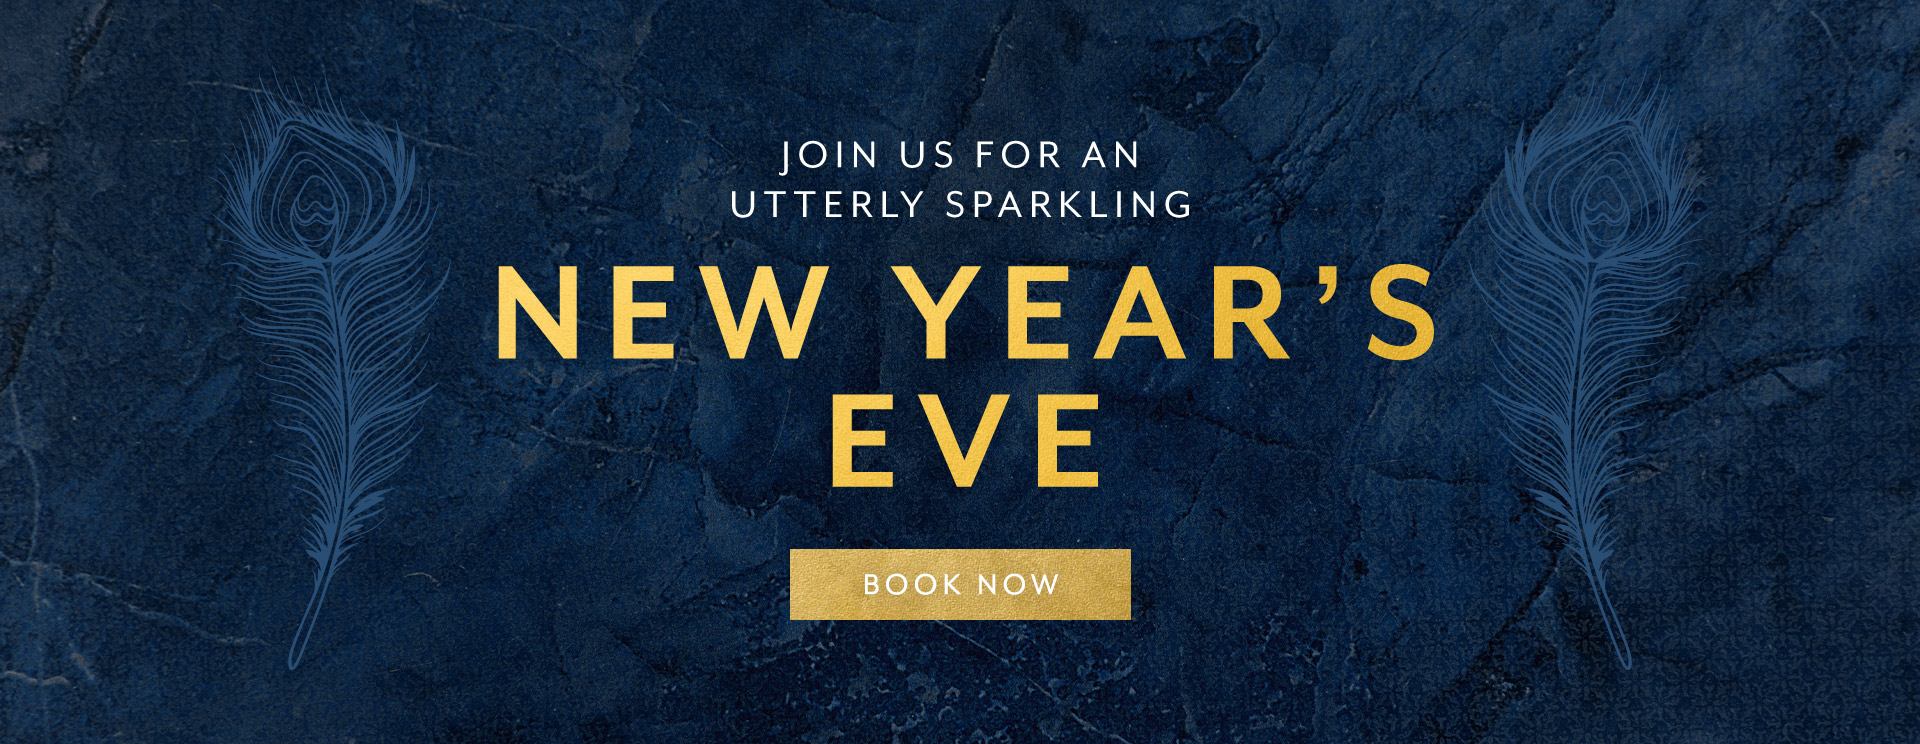 New Year's Eve at The Kingfisher